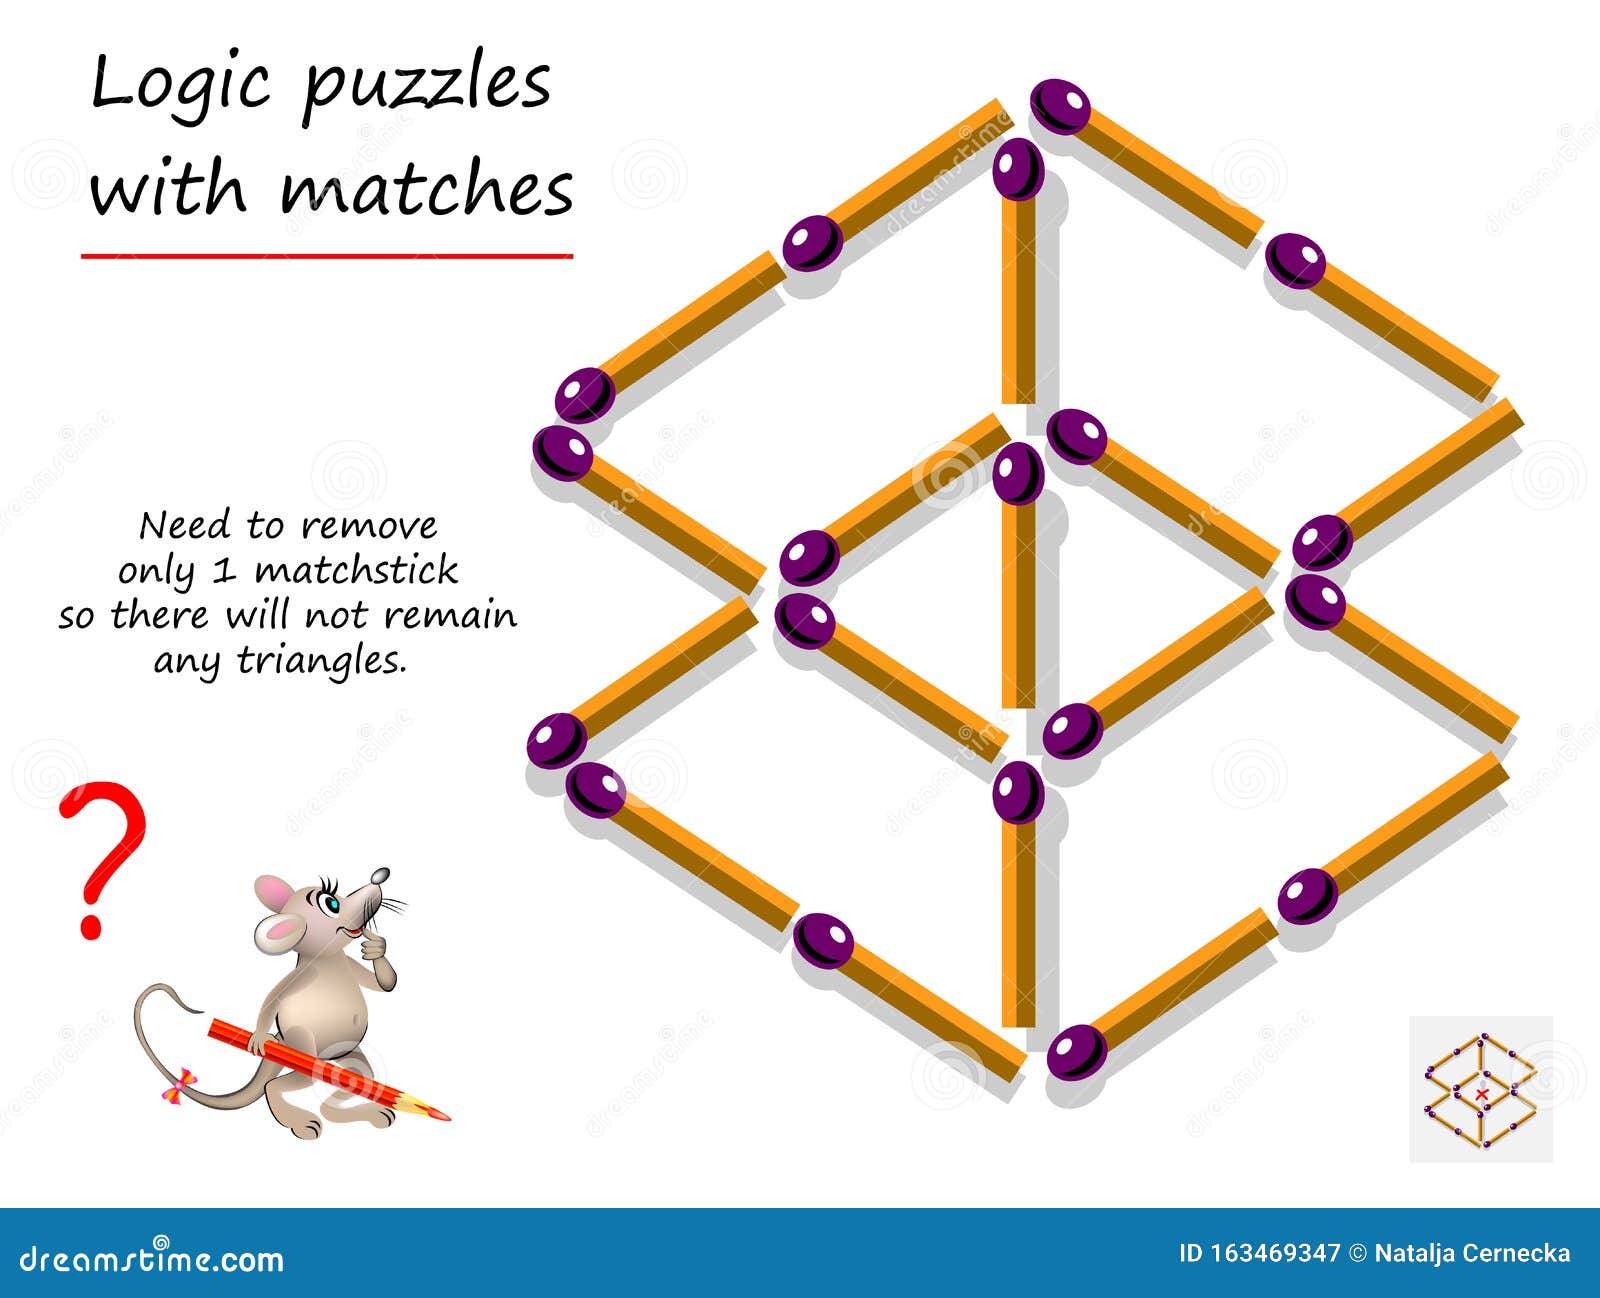 logical puzzle game with matches for children and adults. need to remove only 1 matchstick so there will not remain any triangles.